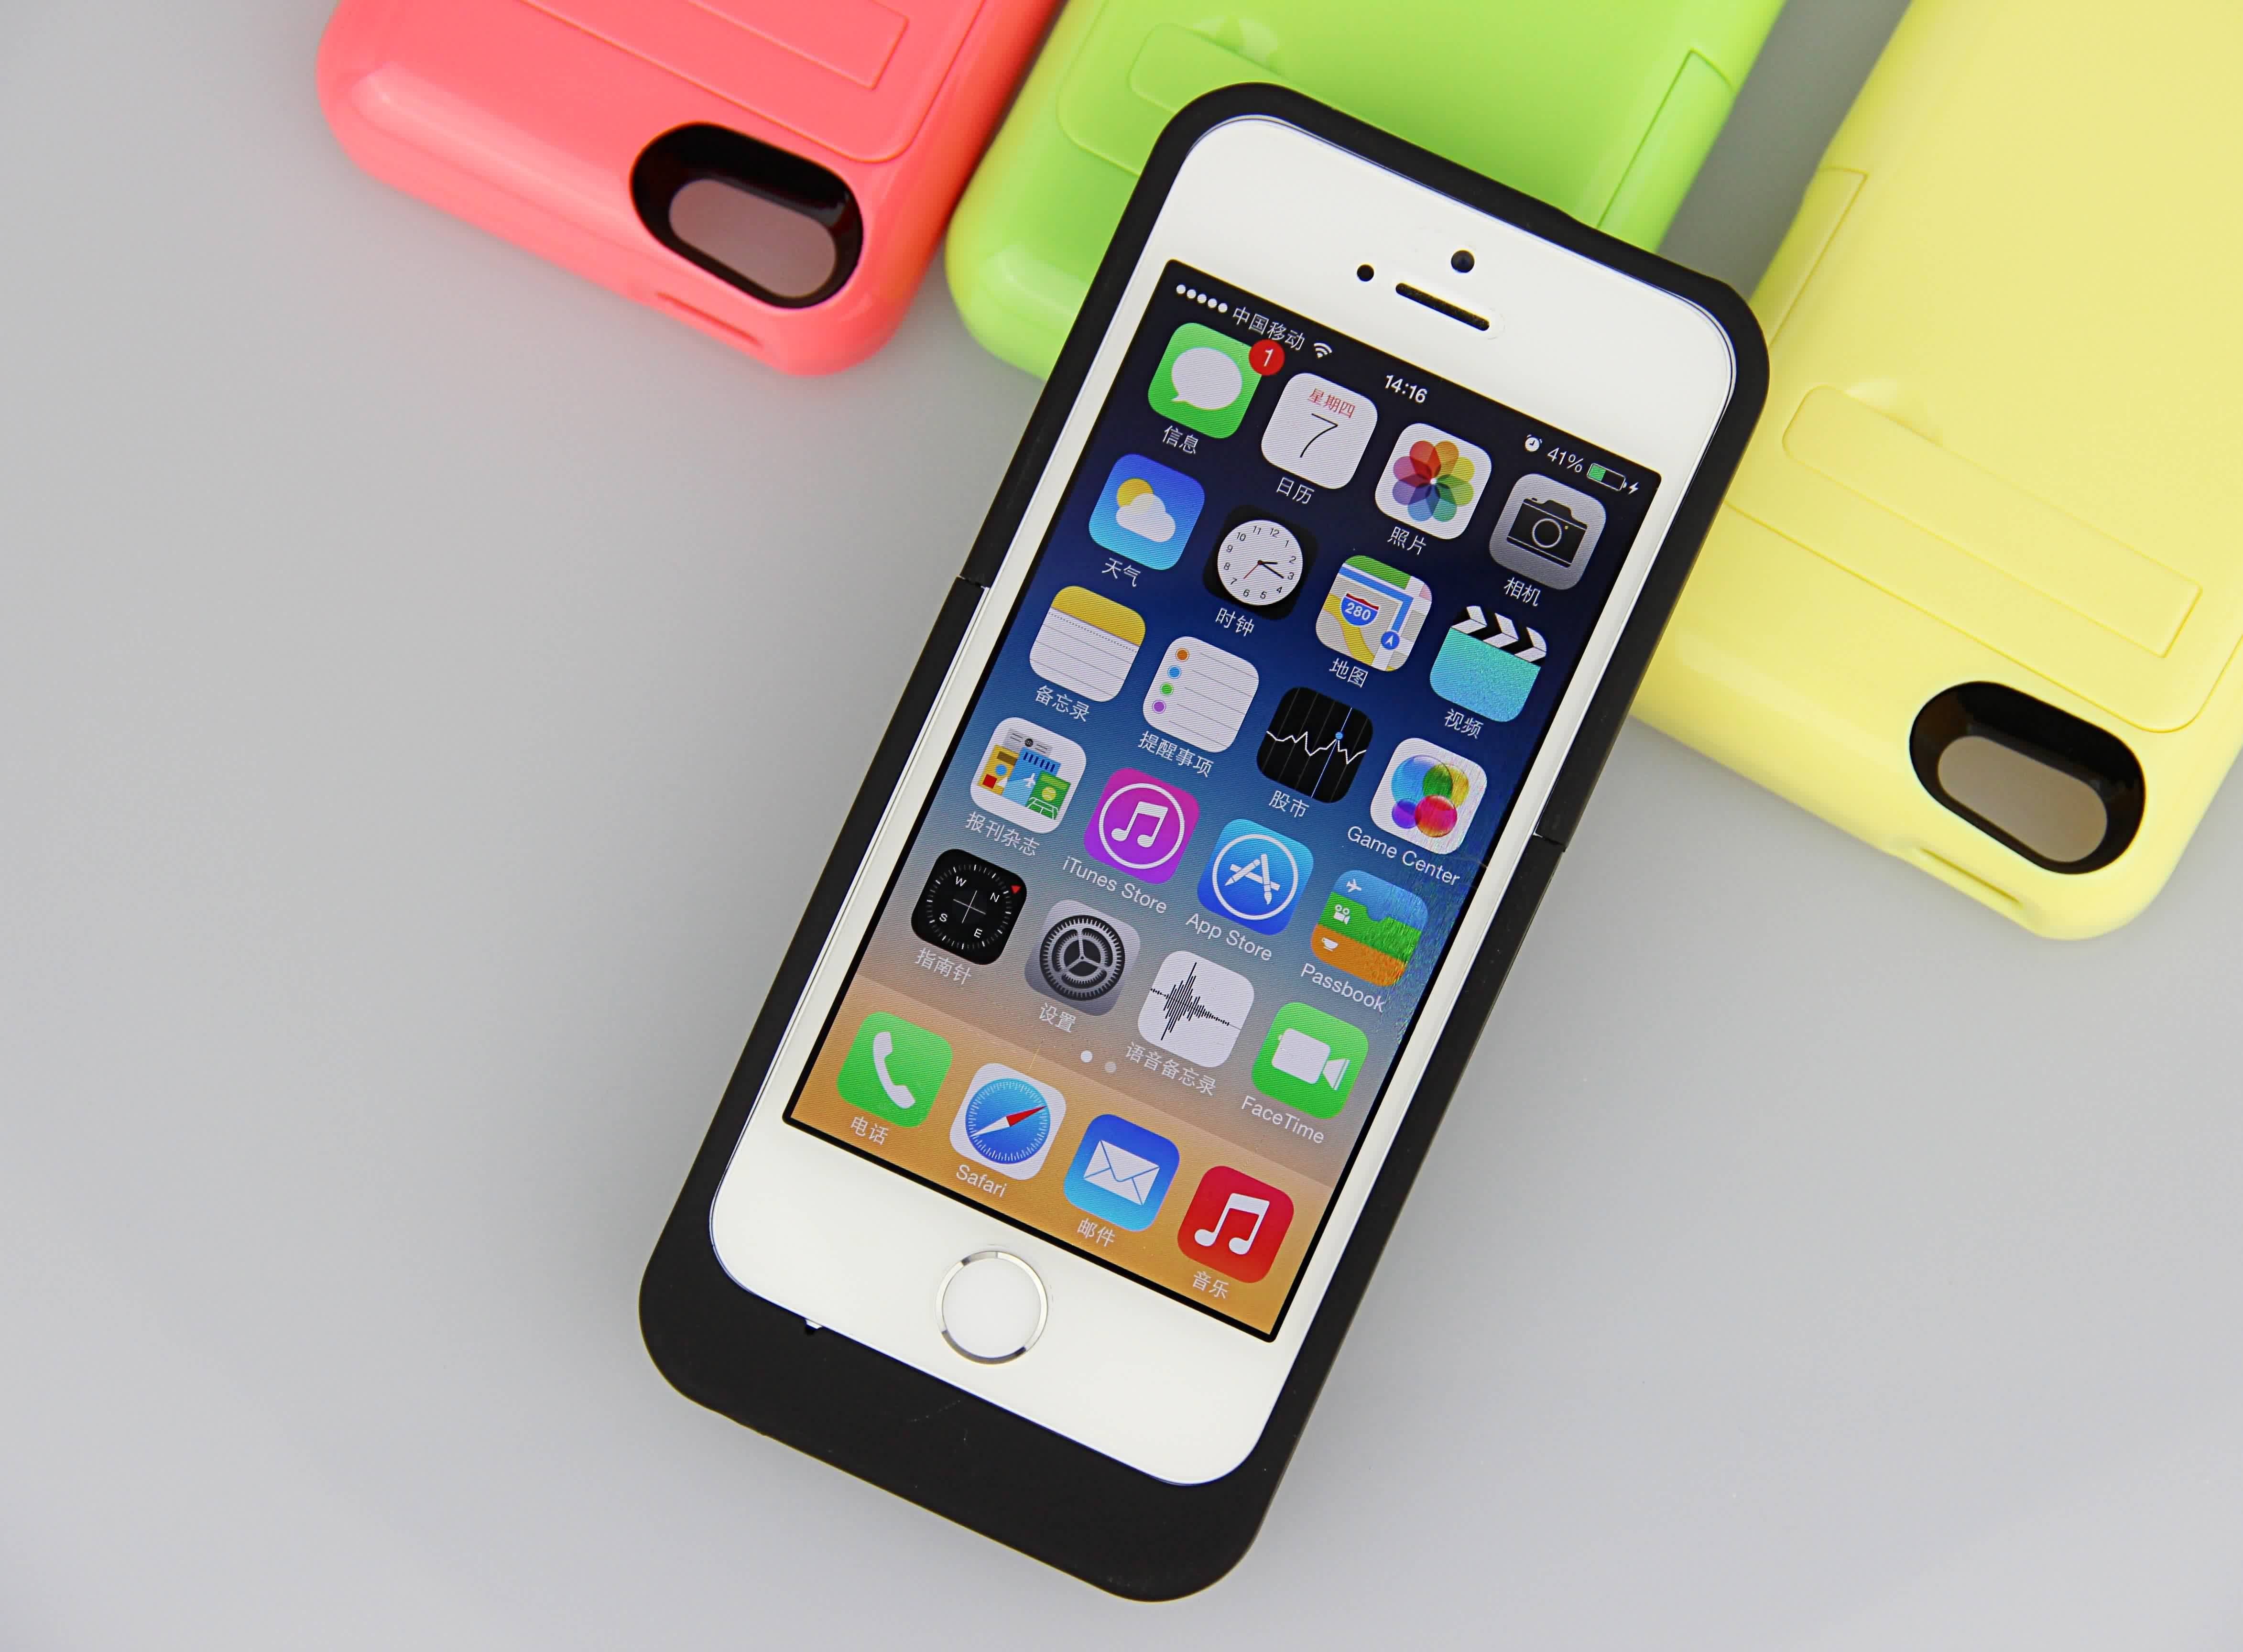 Multi Color Cienki iPhone Battery Case 2200mAh Battery Power Pack dla iPhone 5